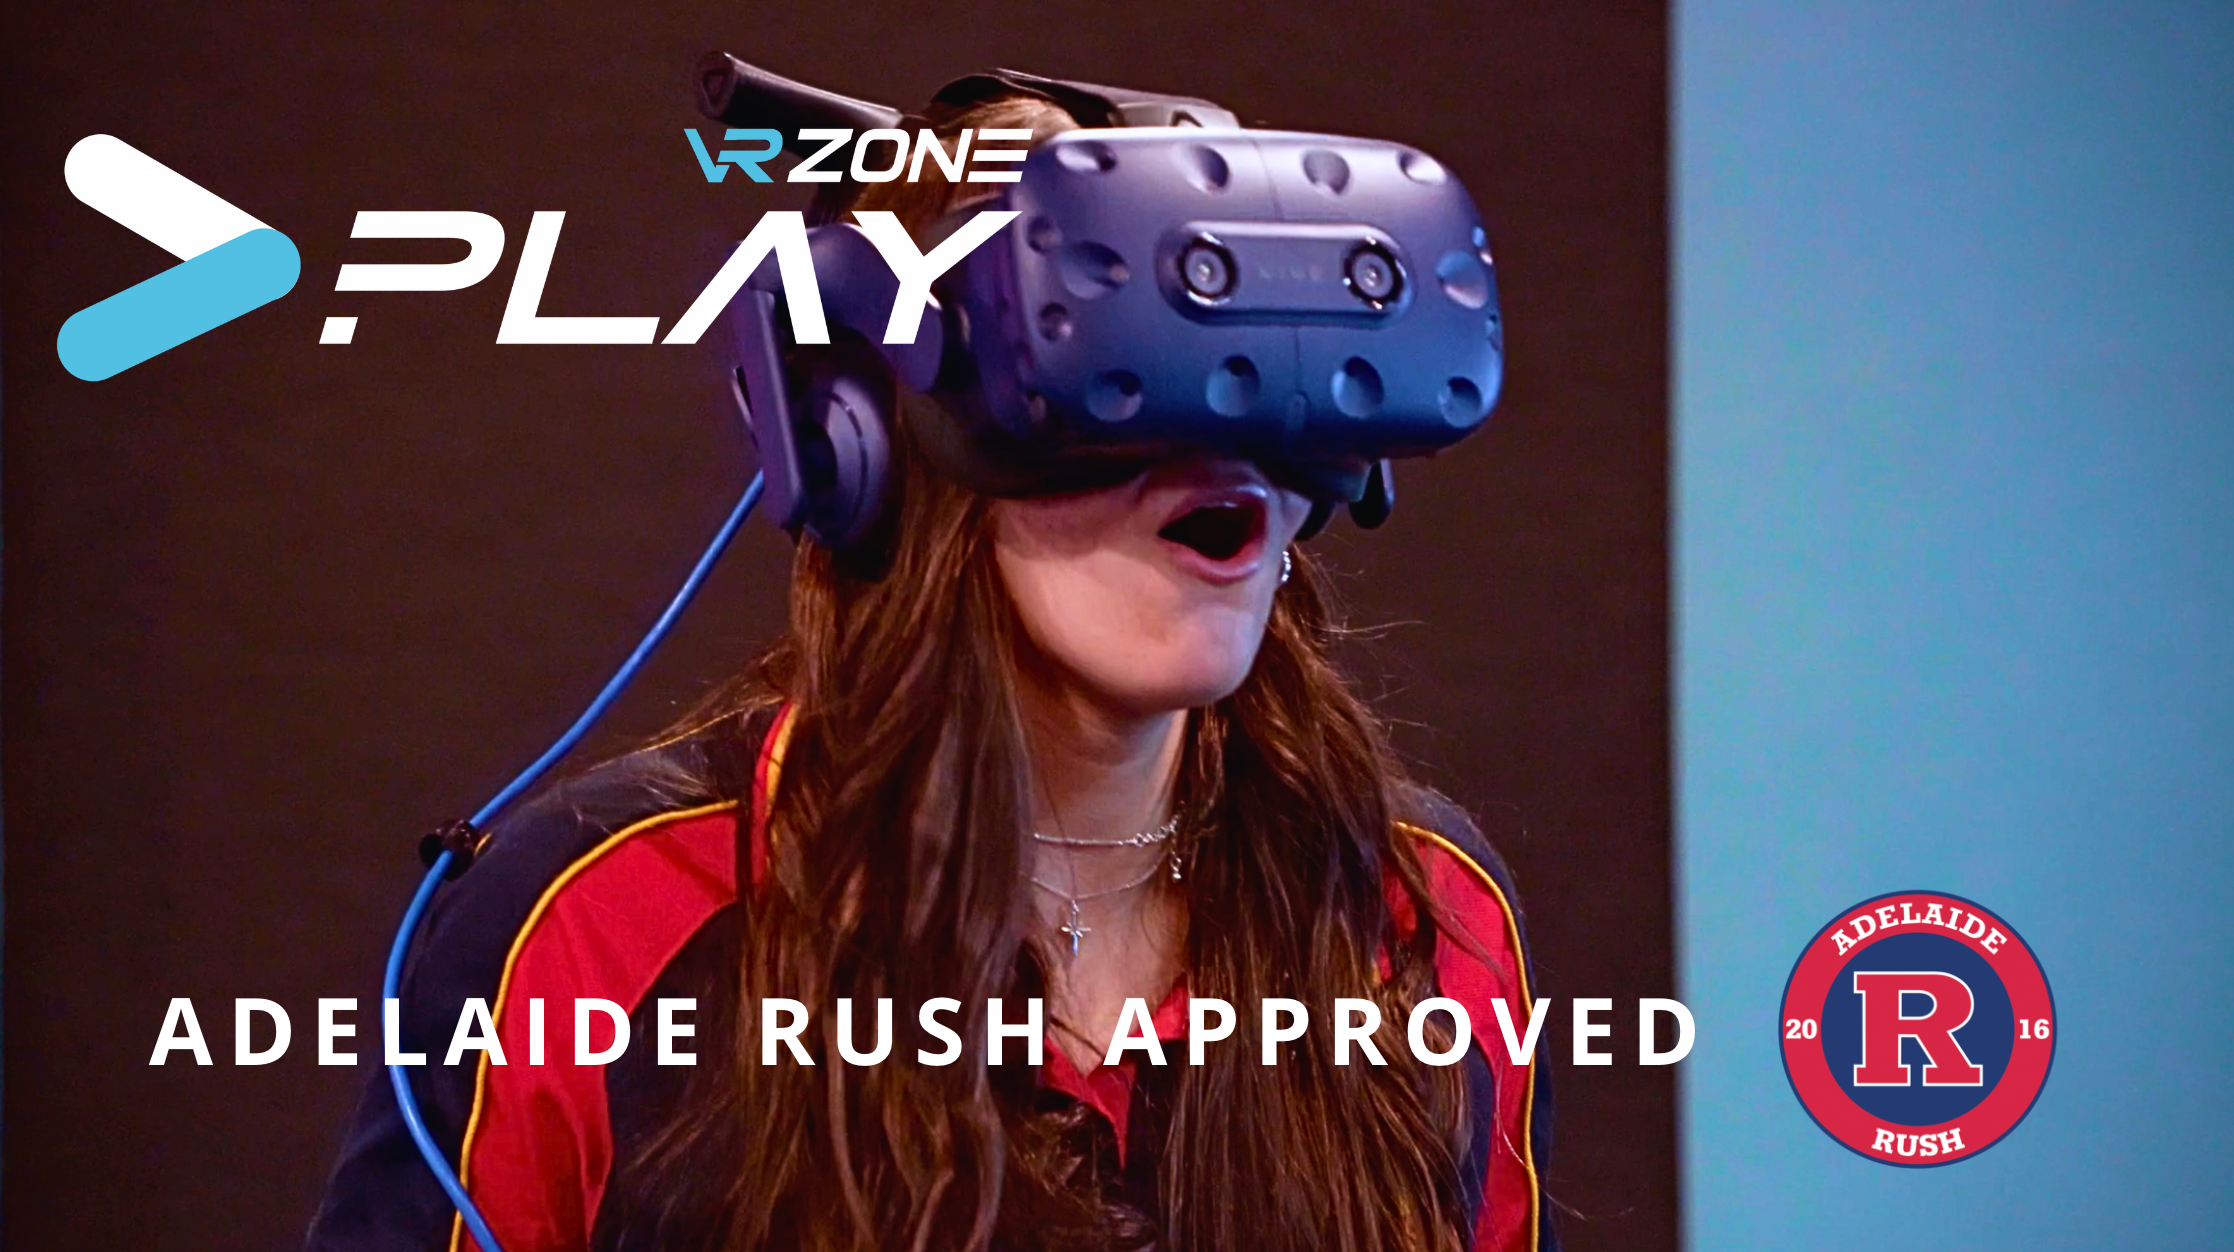 Load video: Play your favourite games at VR Zone Play, Adelaide Rush approved